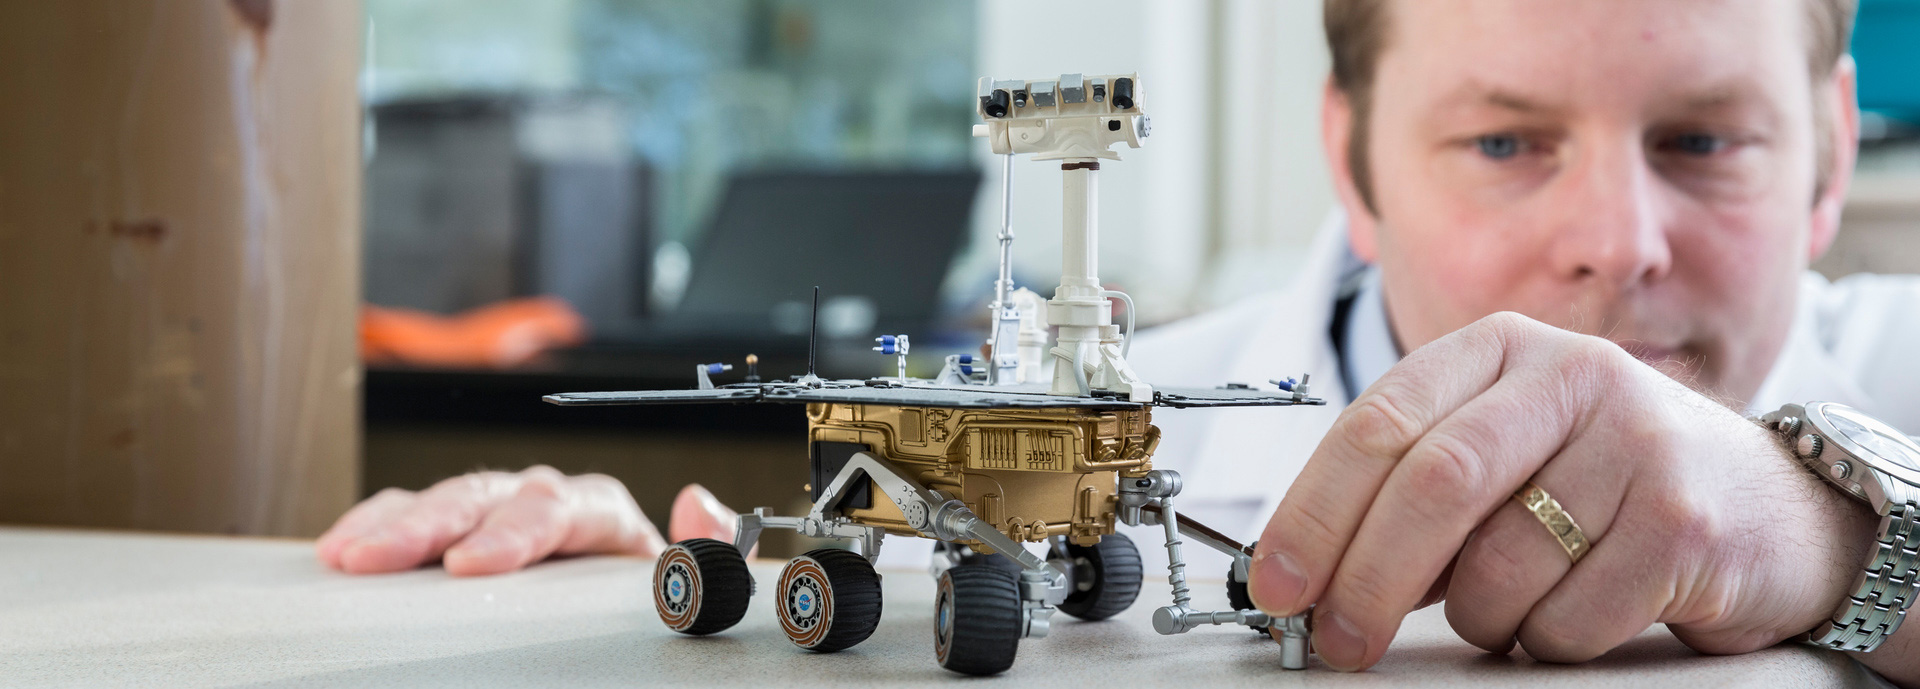 Man with model of Mars rover